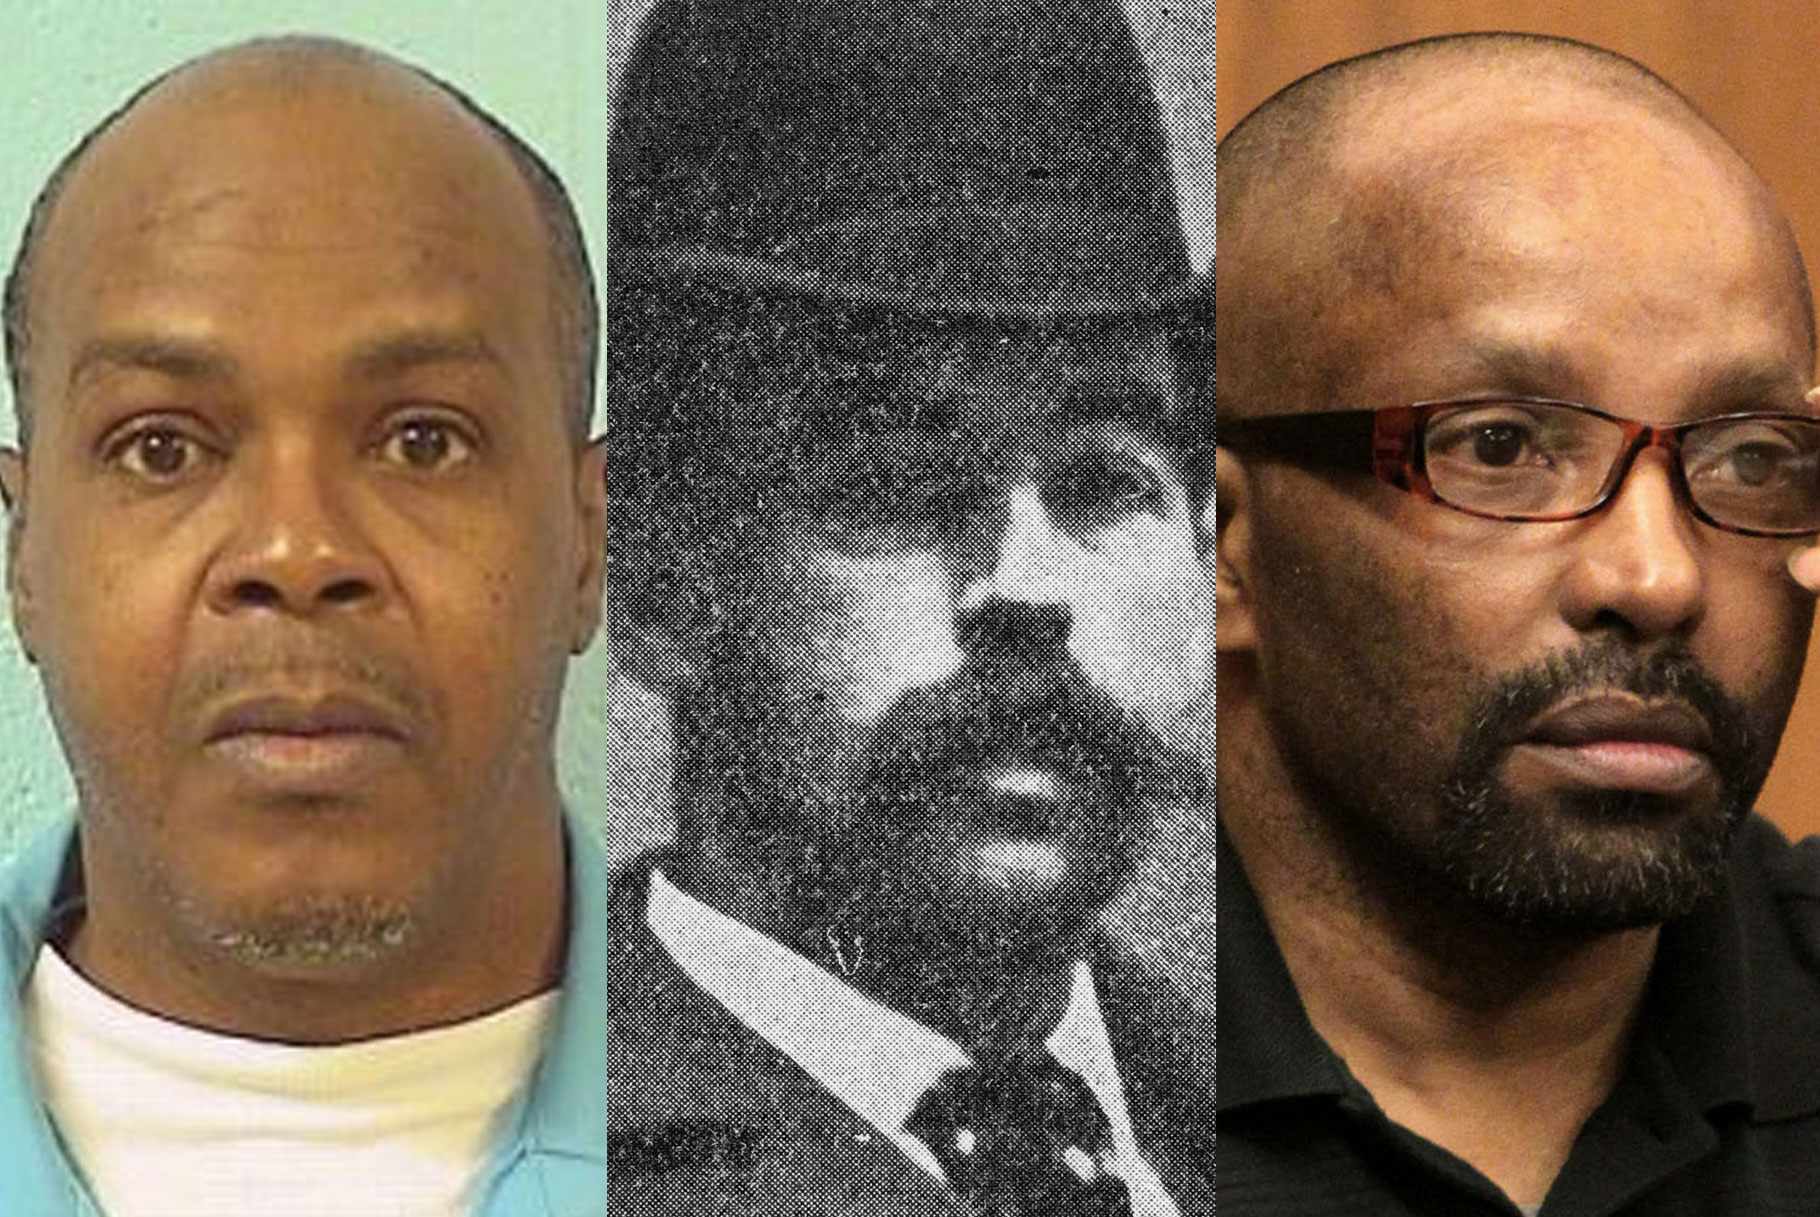 Andre Crawford Hh Holmes Anthony Sowell